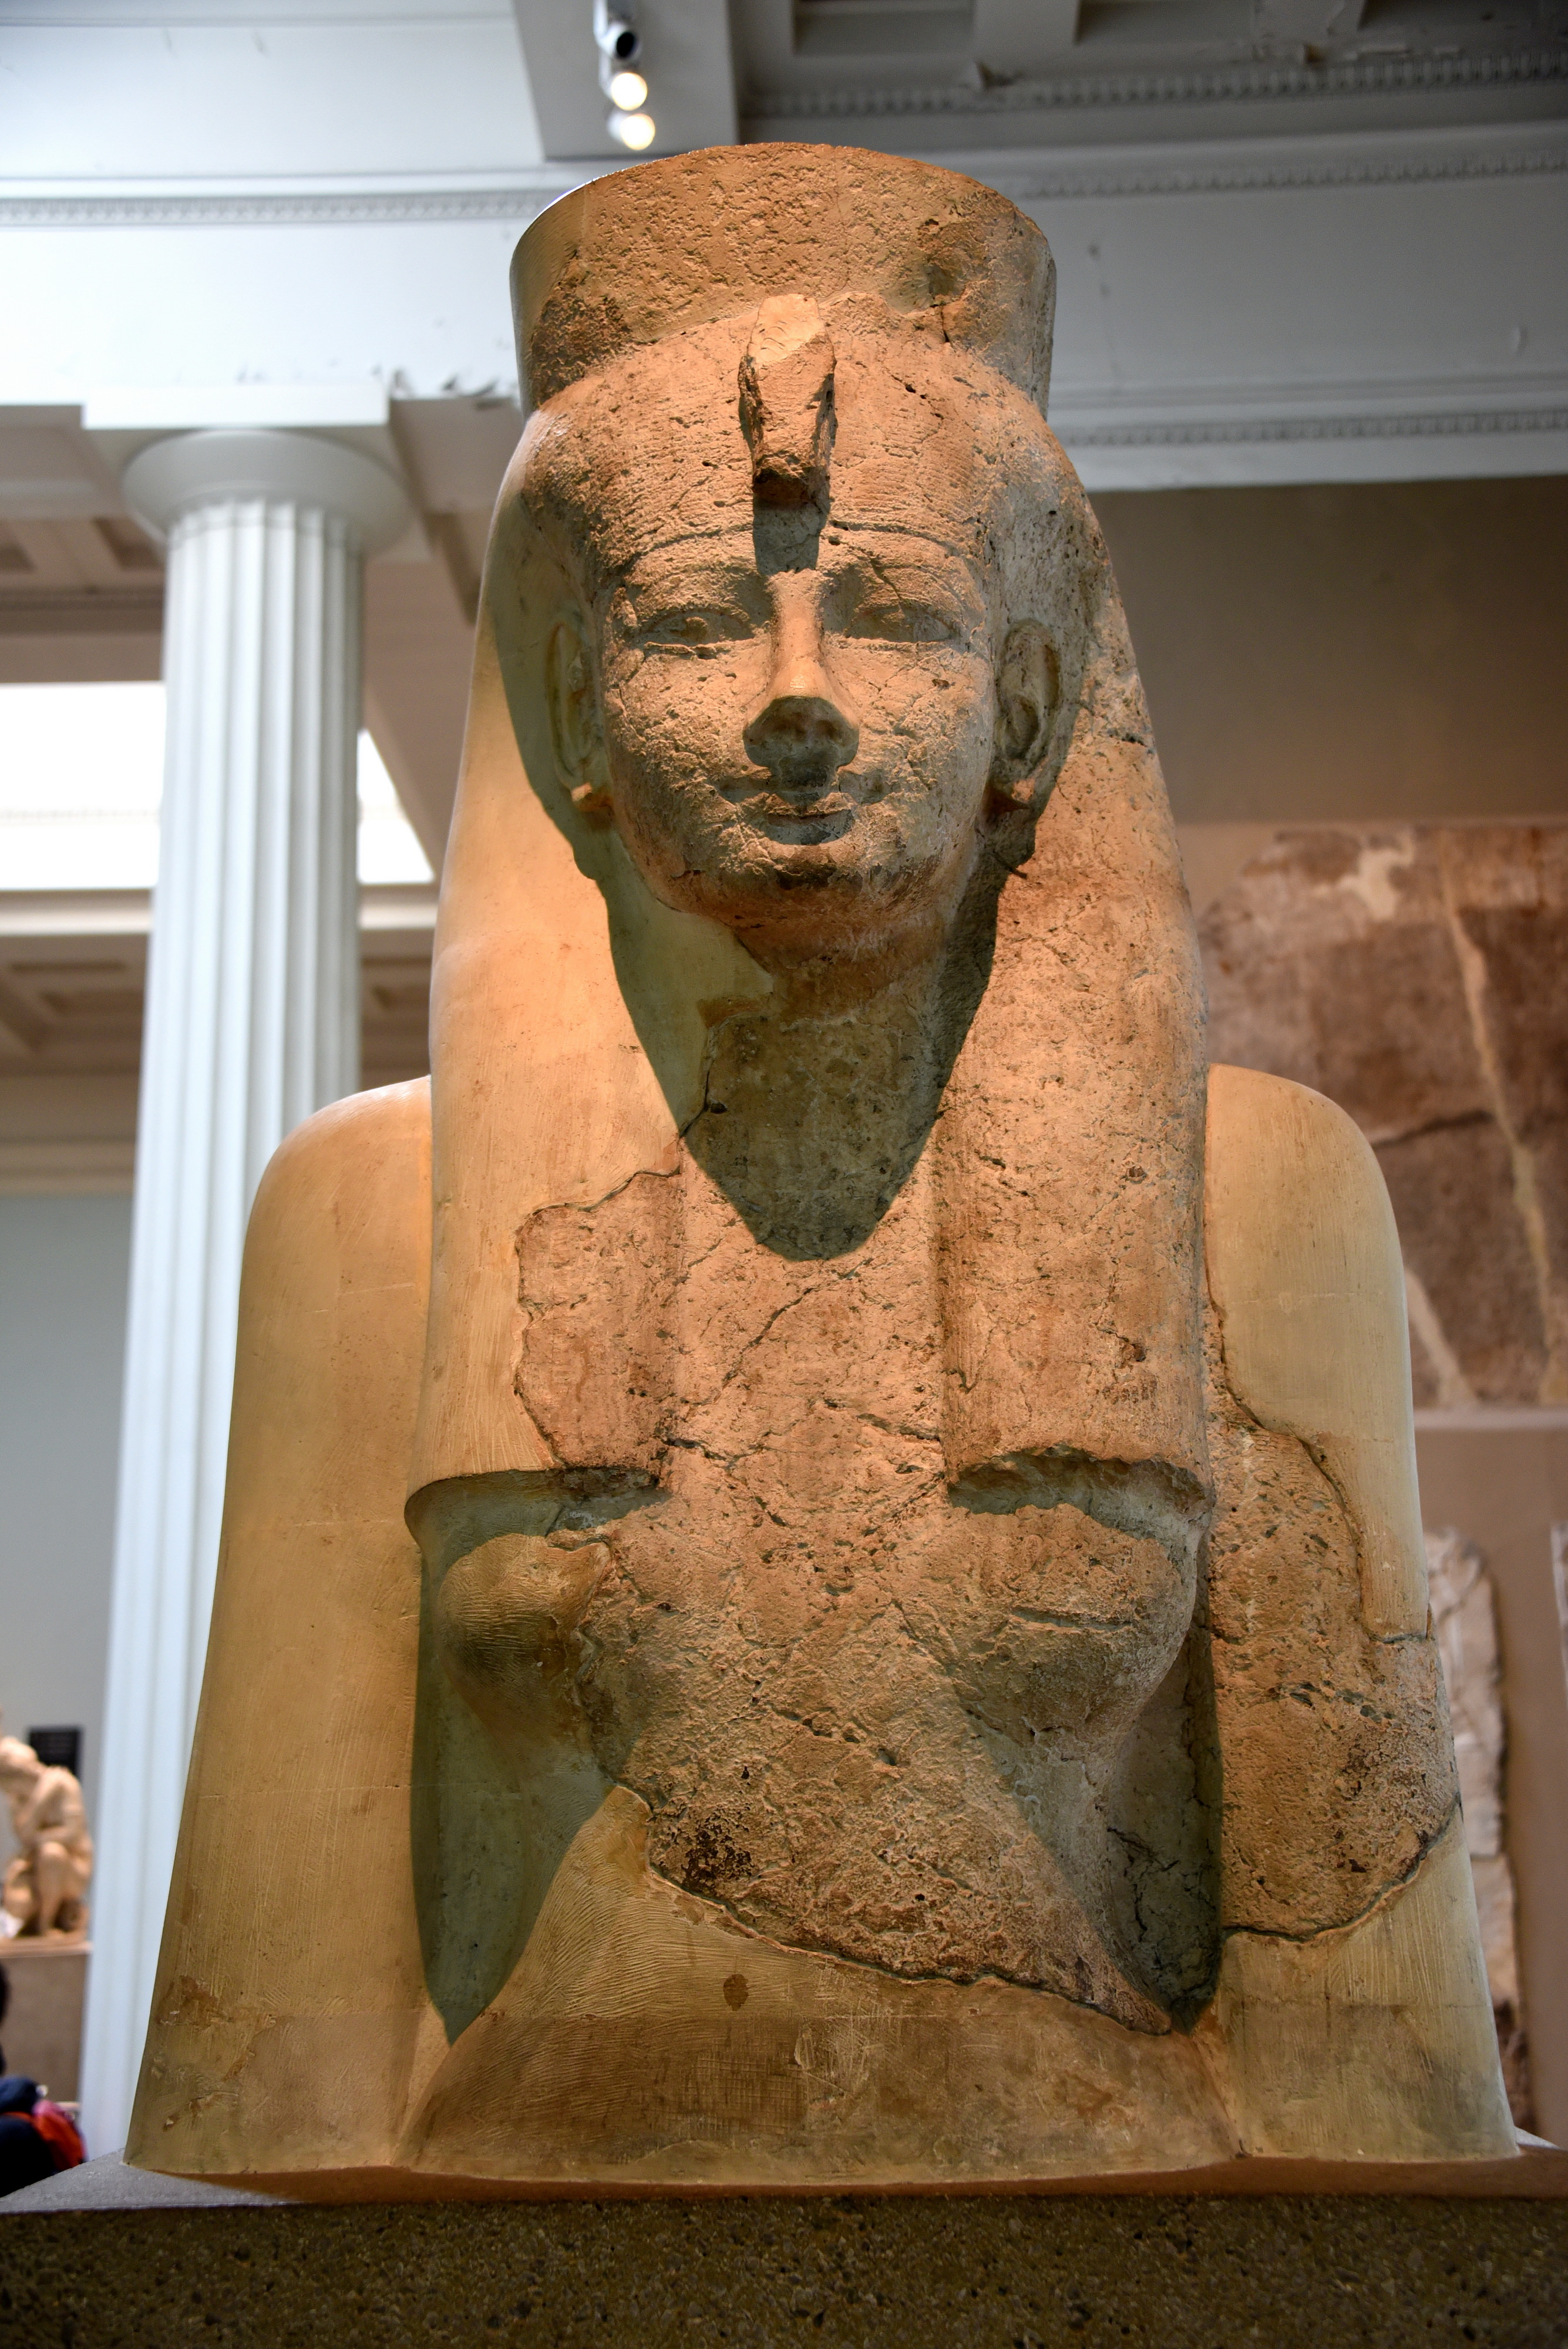 3 - large statue of Hathor, main goddess of the 1st generation of gods in Egypt